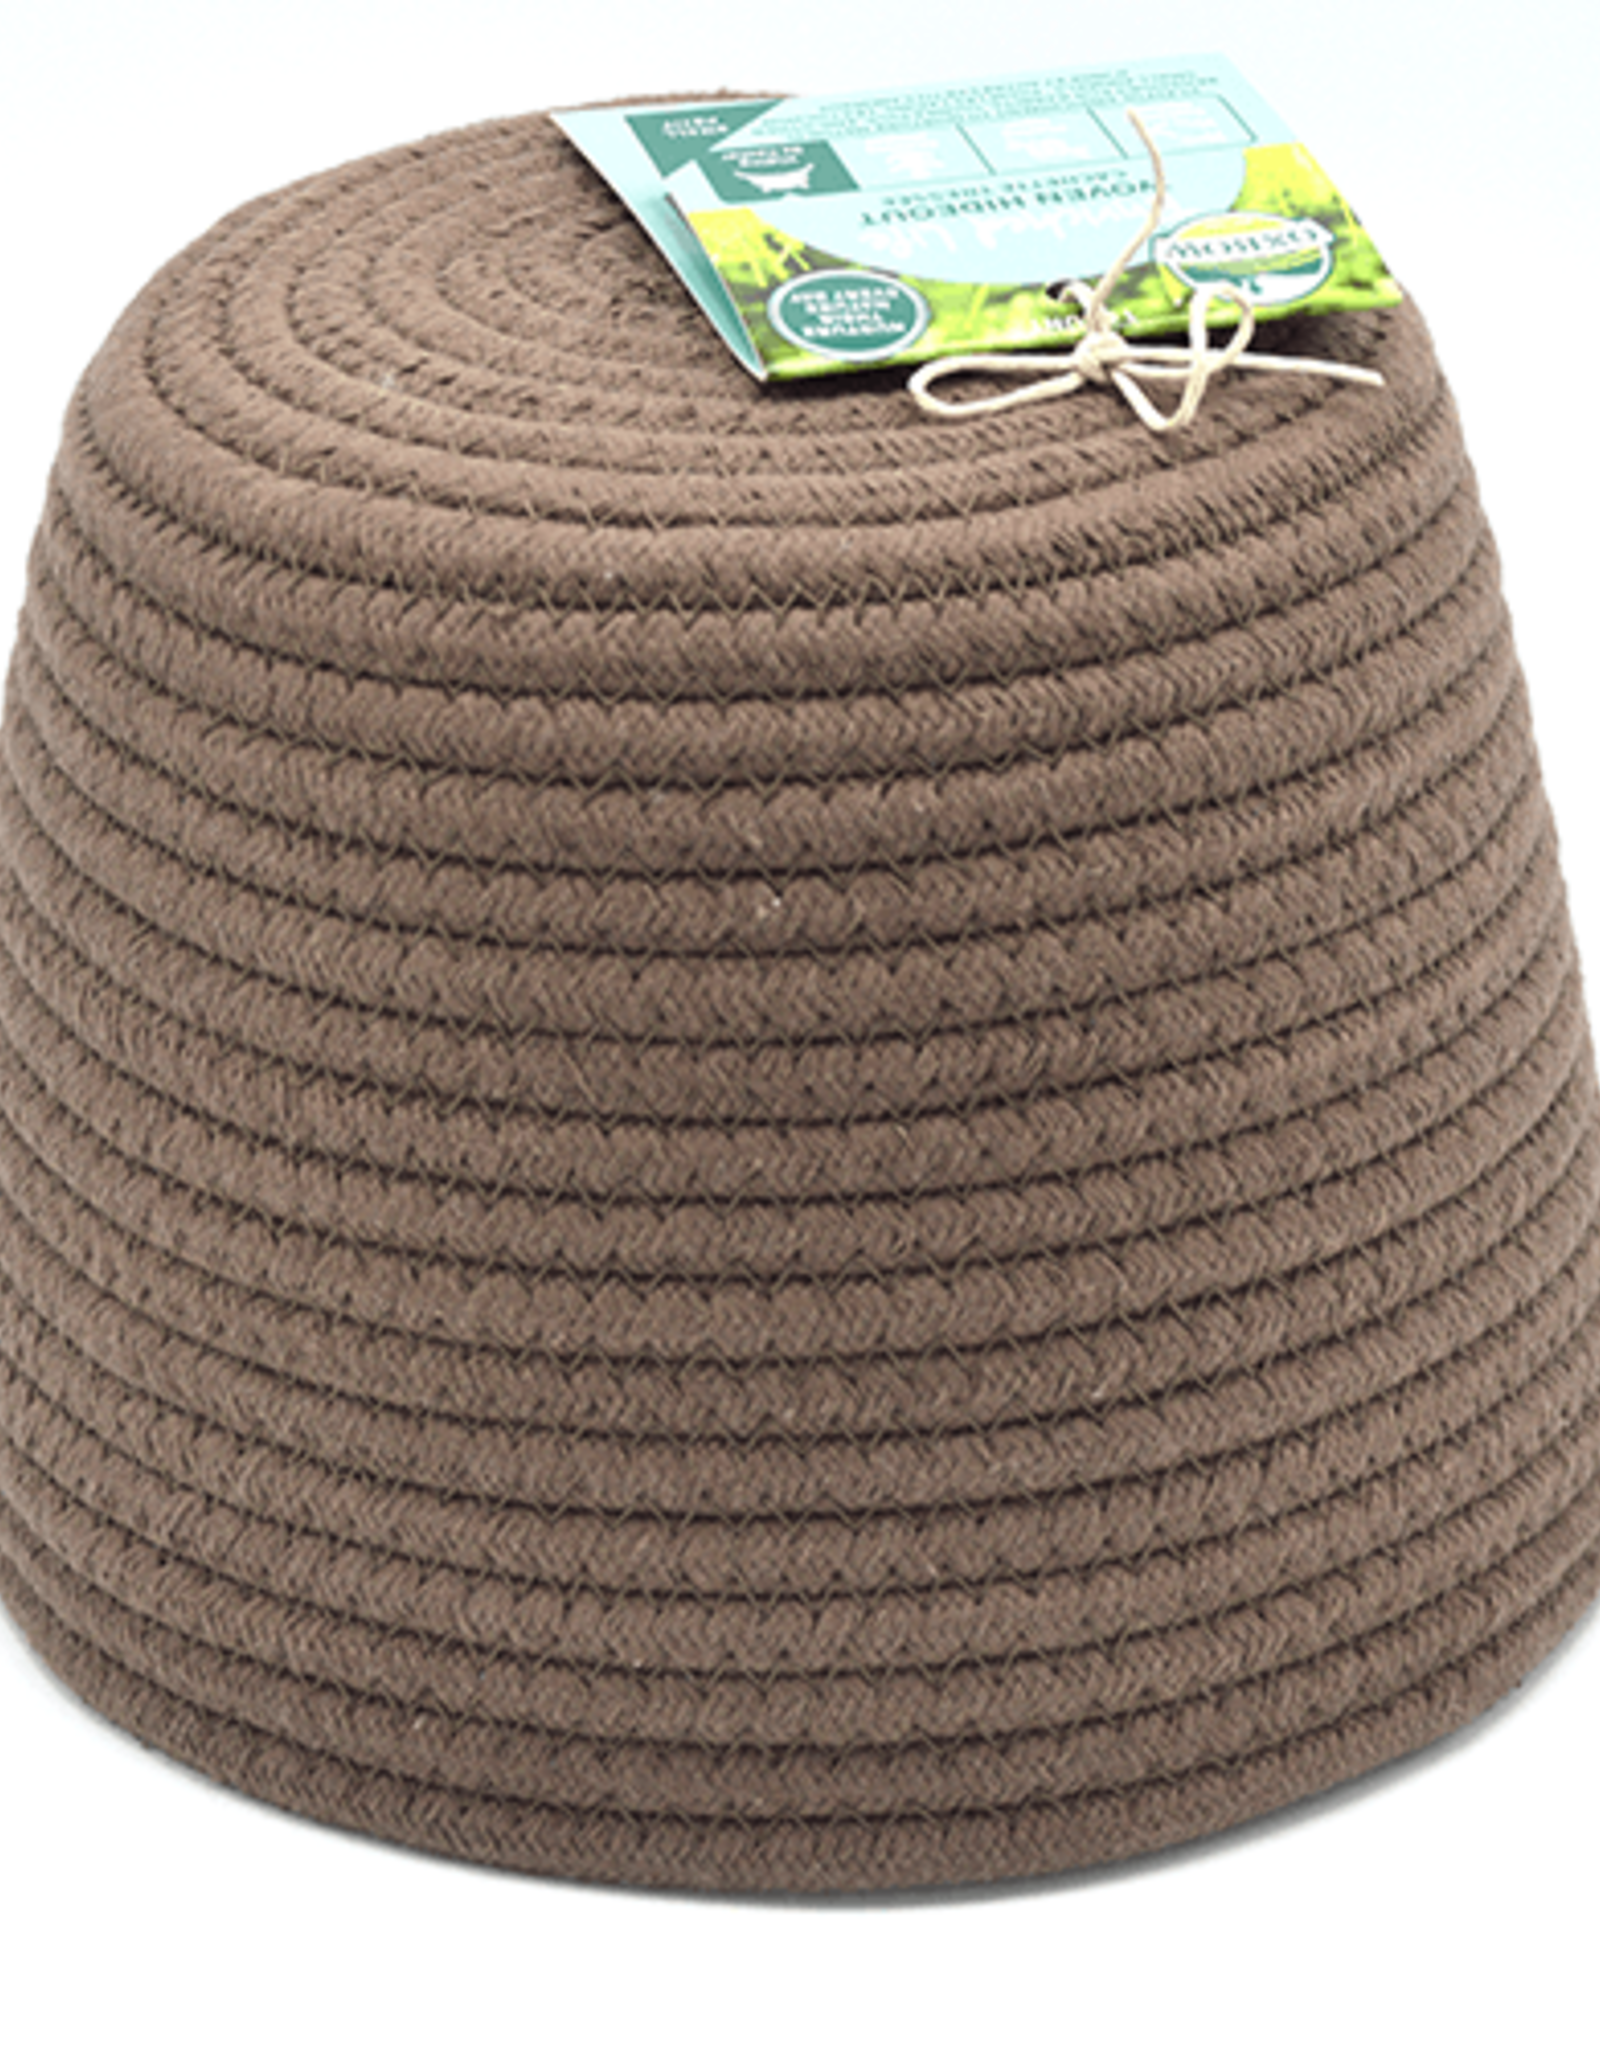 OXBOW PET PRODUCTS OXBOW WOVEN HIDEOUT SM